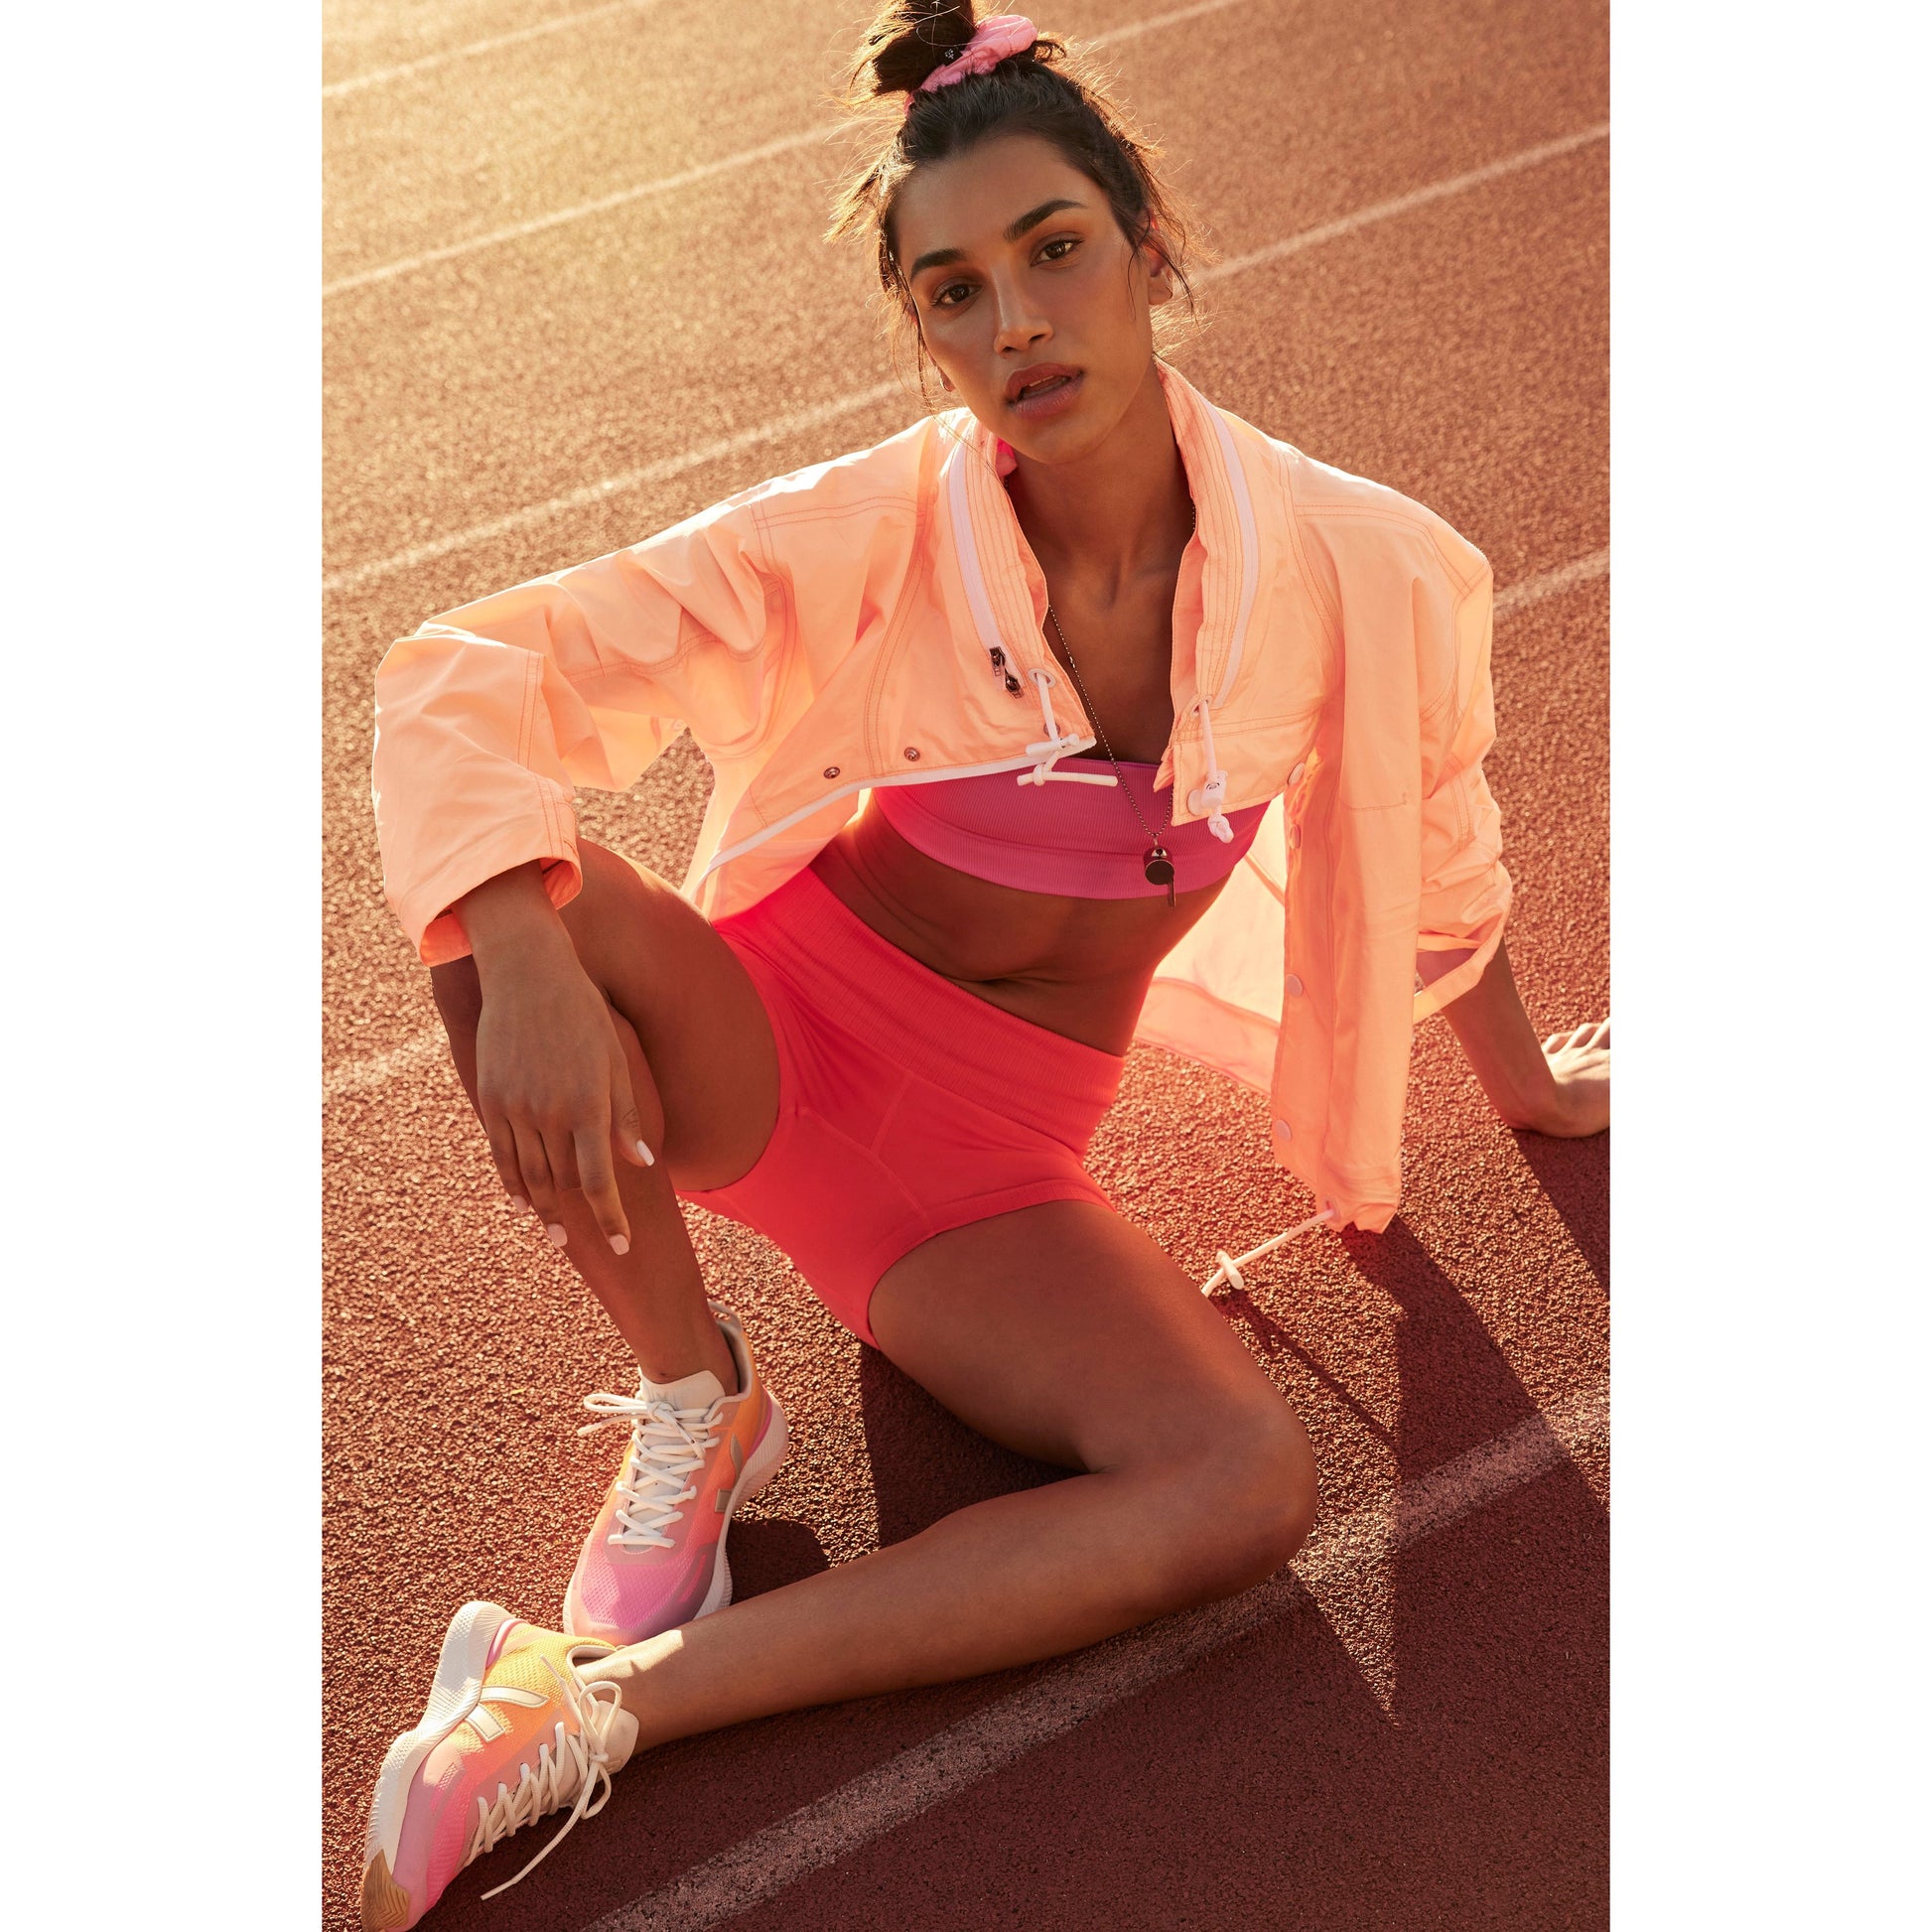 A woman in sportswear, sitting on a running track, wearing a Rain & Shine Jacket in Morning Sun color, shorts, and sneakers, looking up towards the sun.